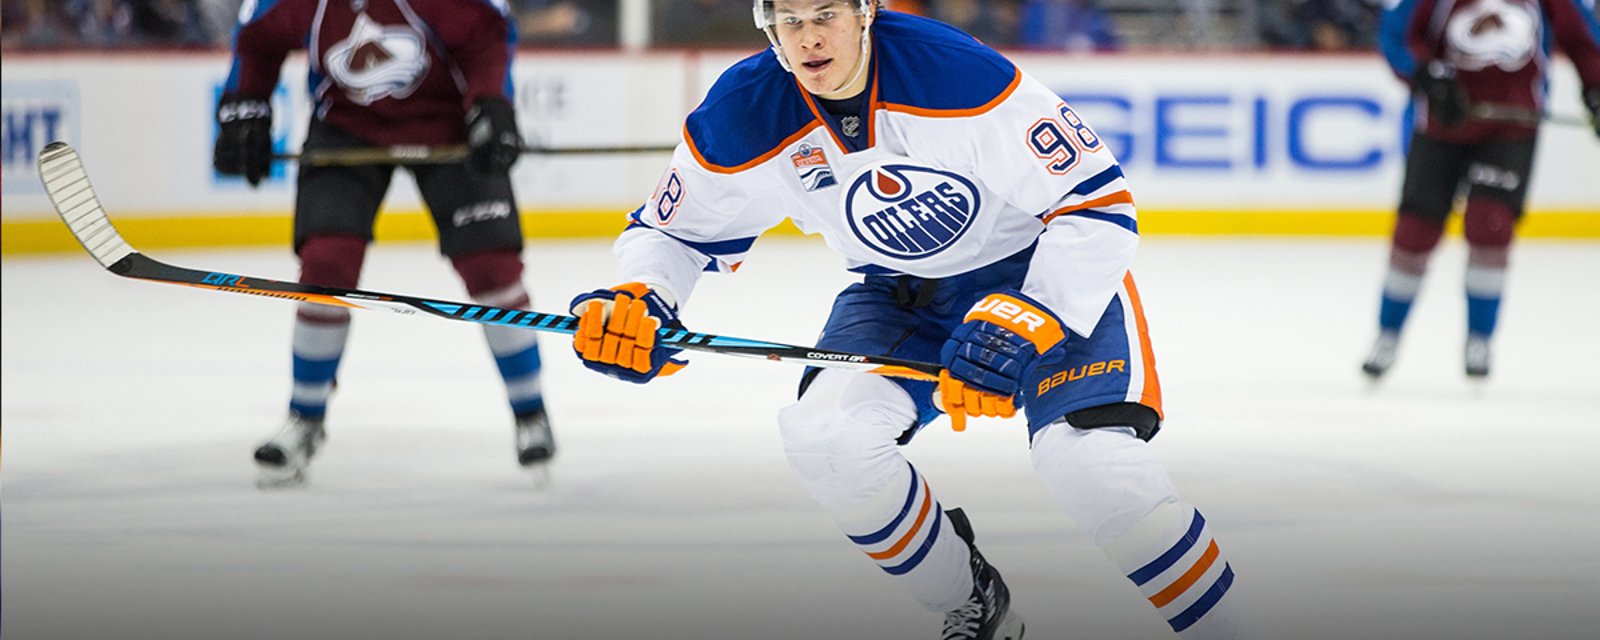 Your Call: Which Oilers player will break through in 2017-18?